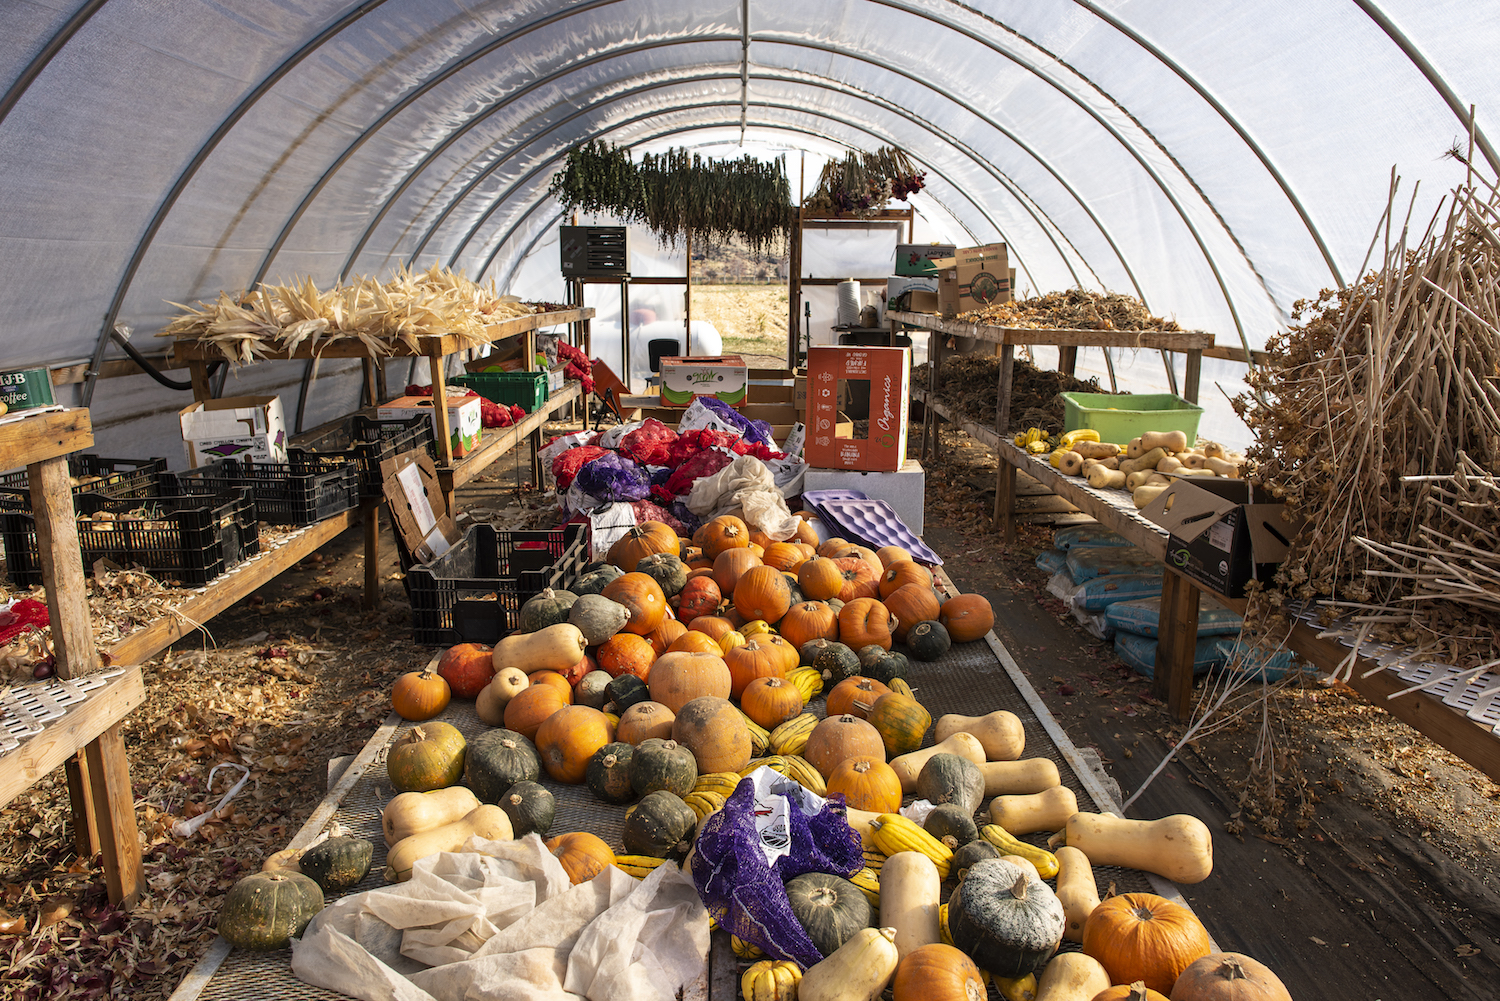 The operators of Fiddler's Green Farm in Boise, Idaho discuss what farmers do in the winter.